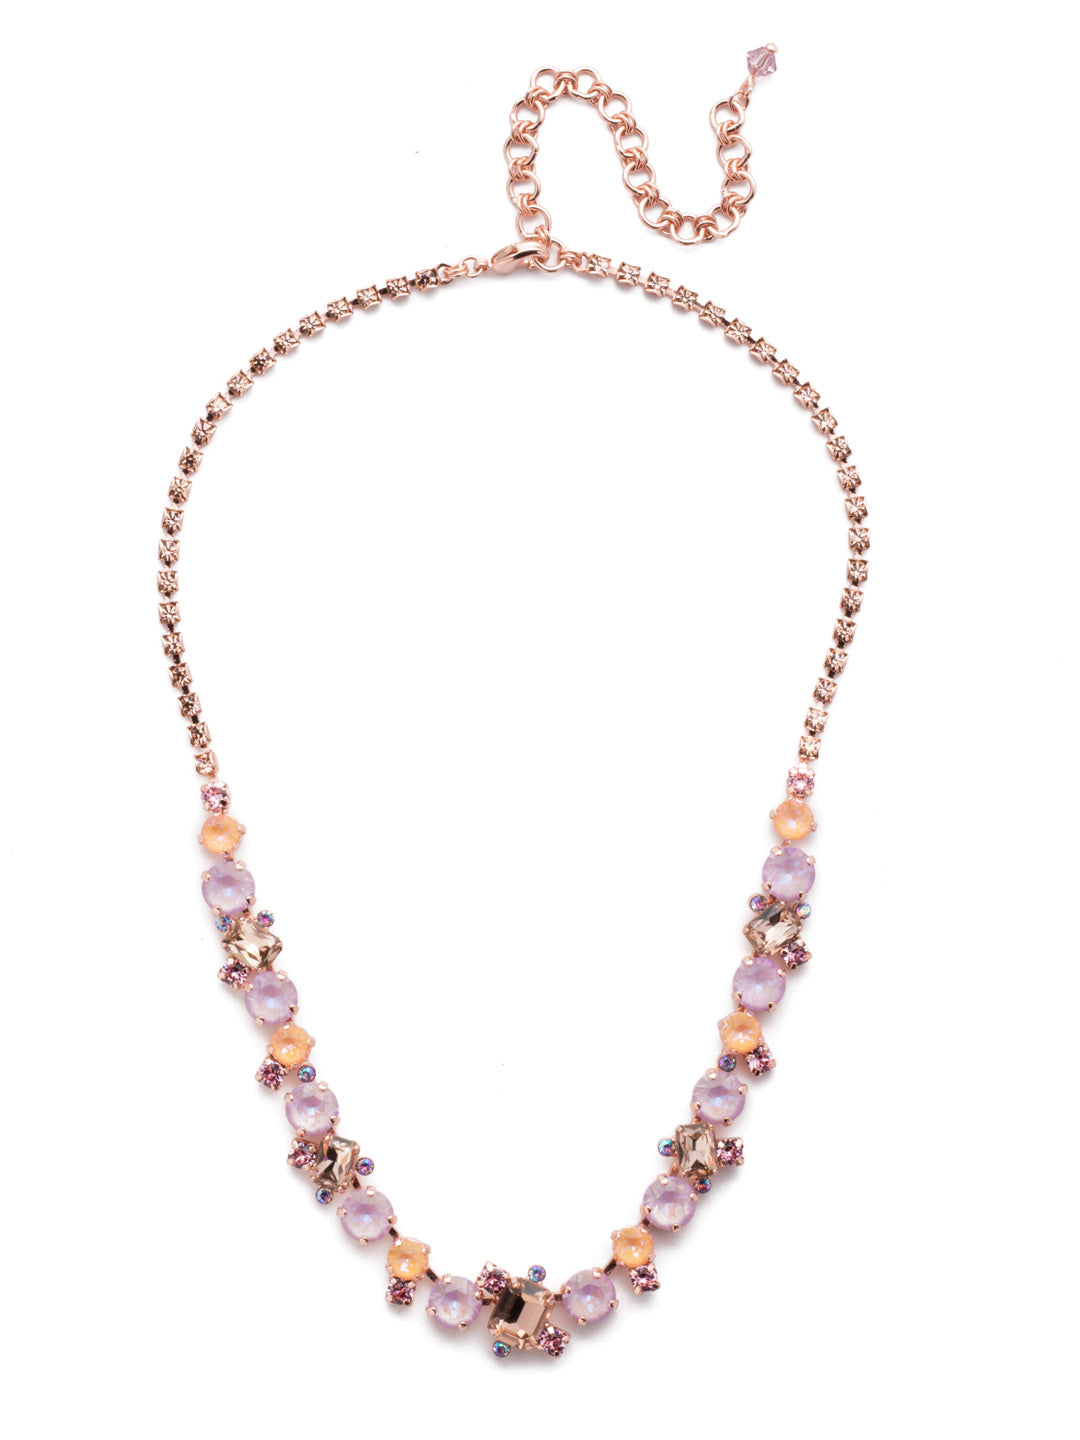 Sophisticated Tennis Necklace - NDK17RGLVP